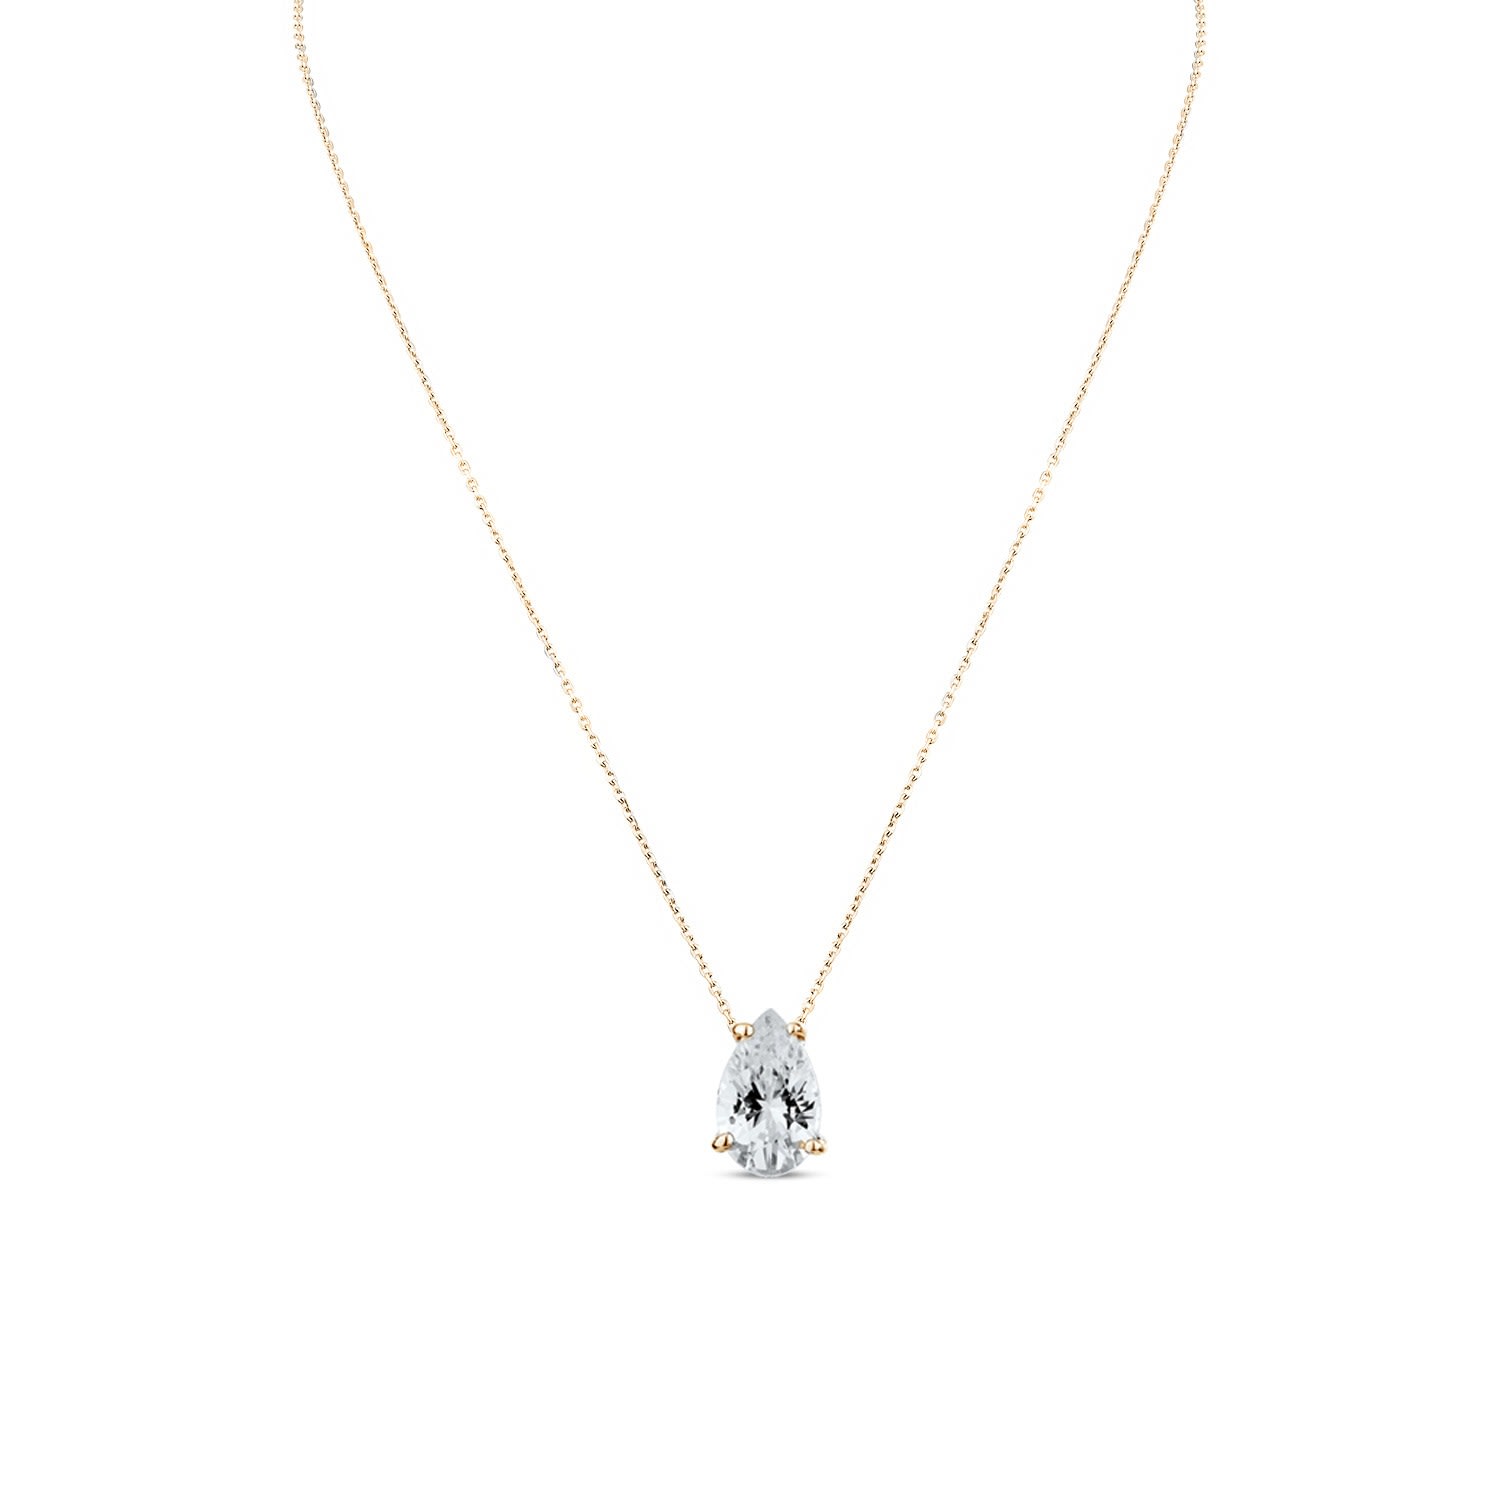 Women’s Gold / White Droplet Necklace Grande With Man Made White Diamond In Gold Sally Skoufis